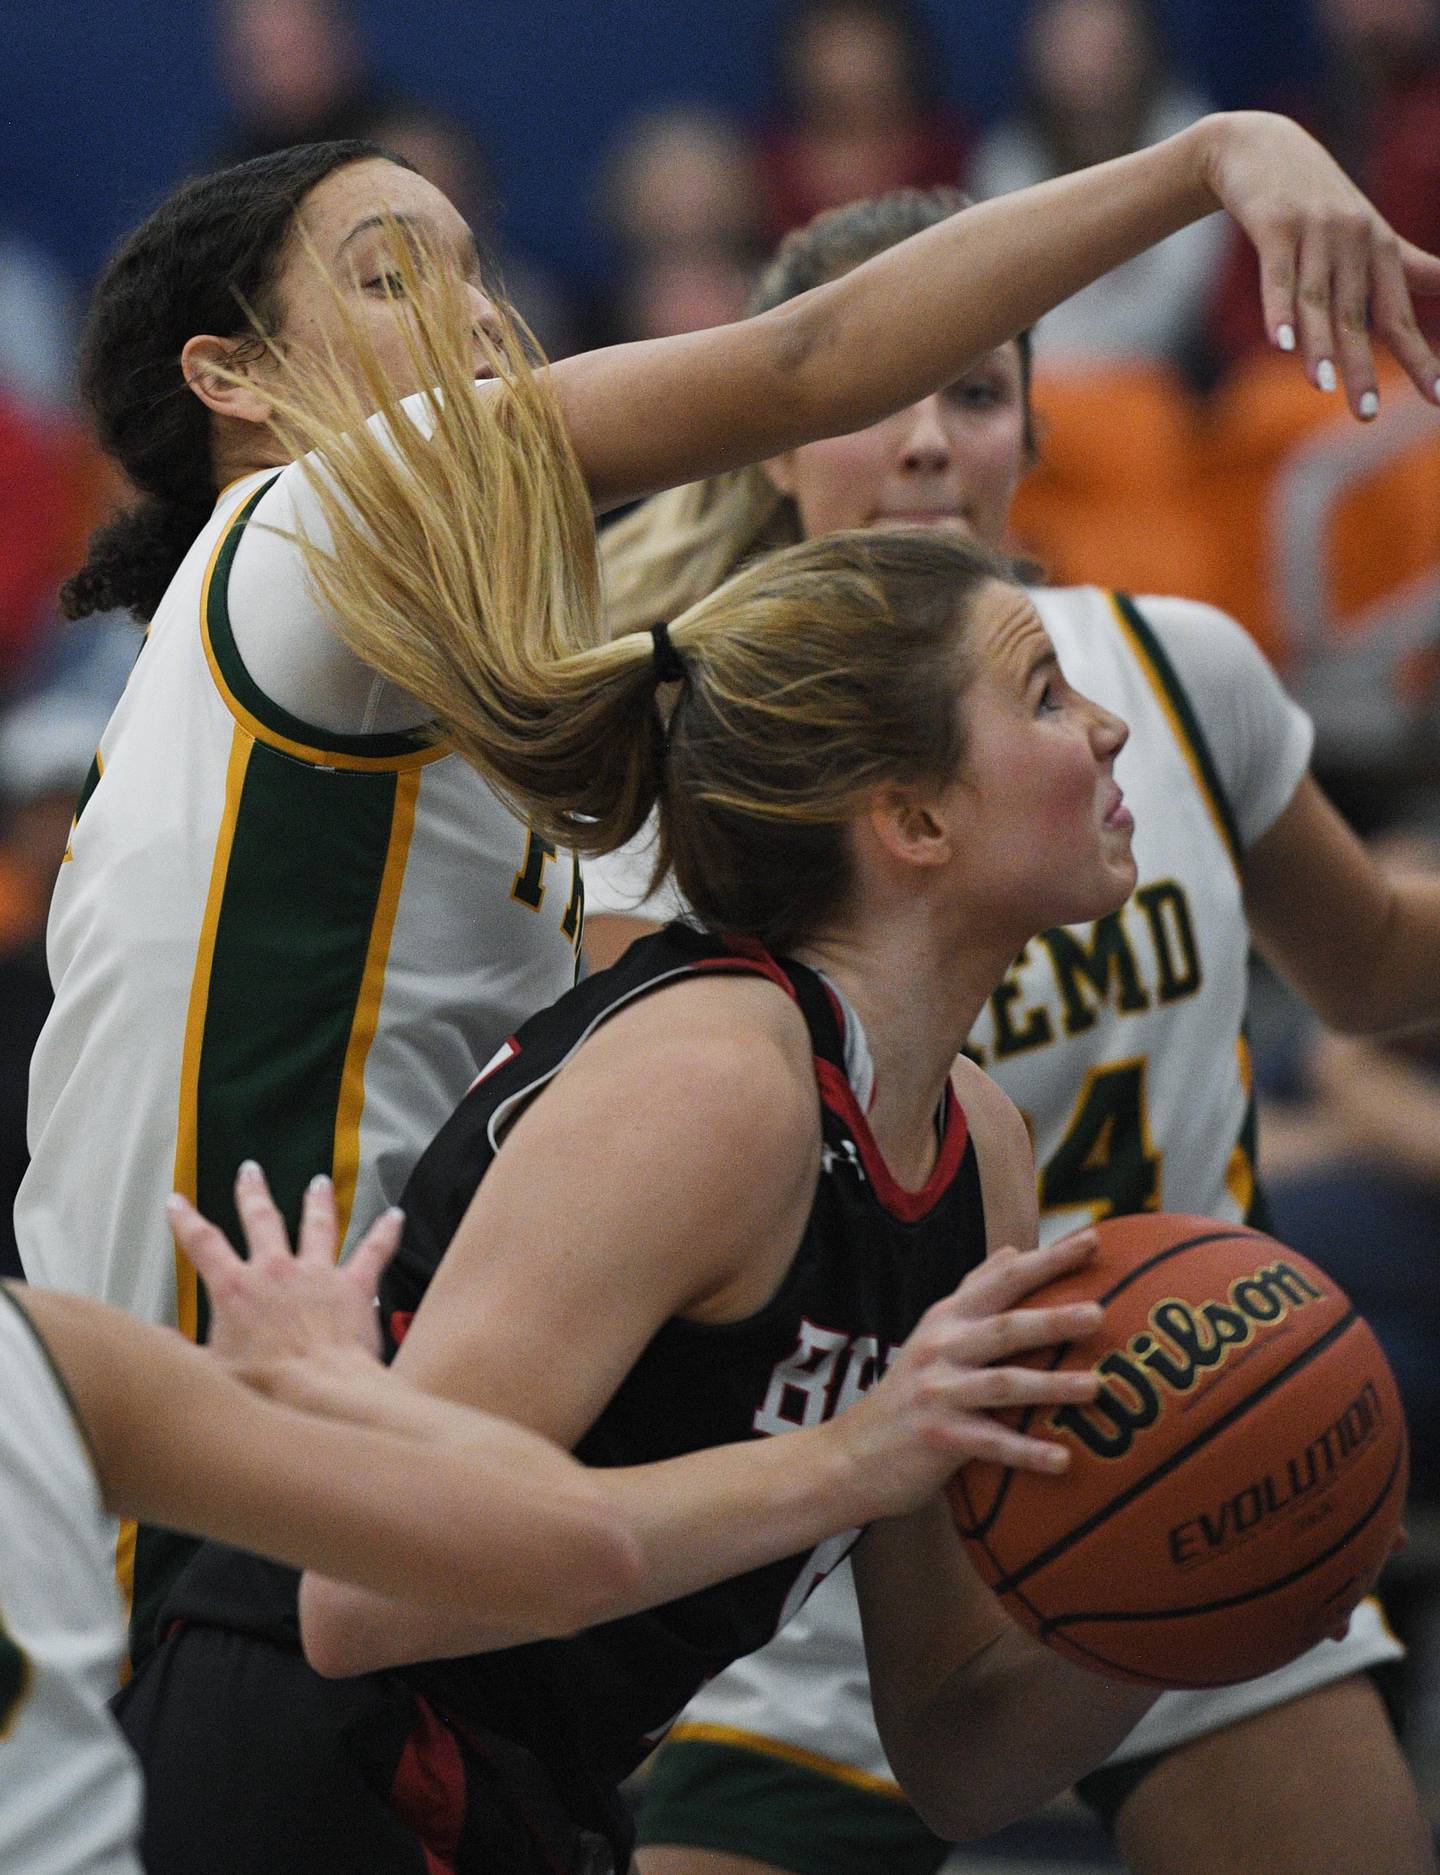 John Starks/jstarks@dailyherald.com
Fremd’s Coco Urlacher tries to block the shot of Benet’s Lenee Beaumont in the semifinal game of the Morton College girls basketball tournament in Cicero on Thursday, December 29, 2022.